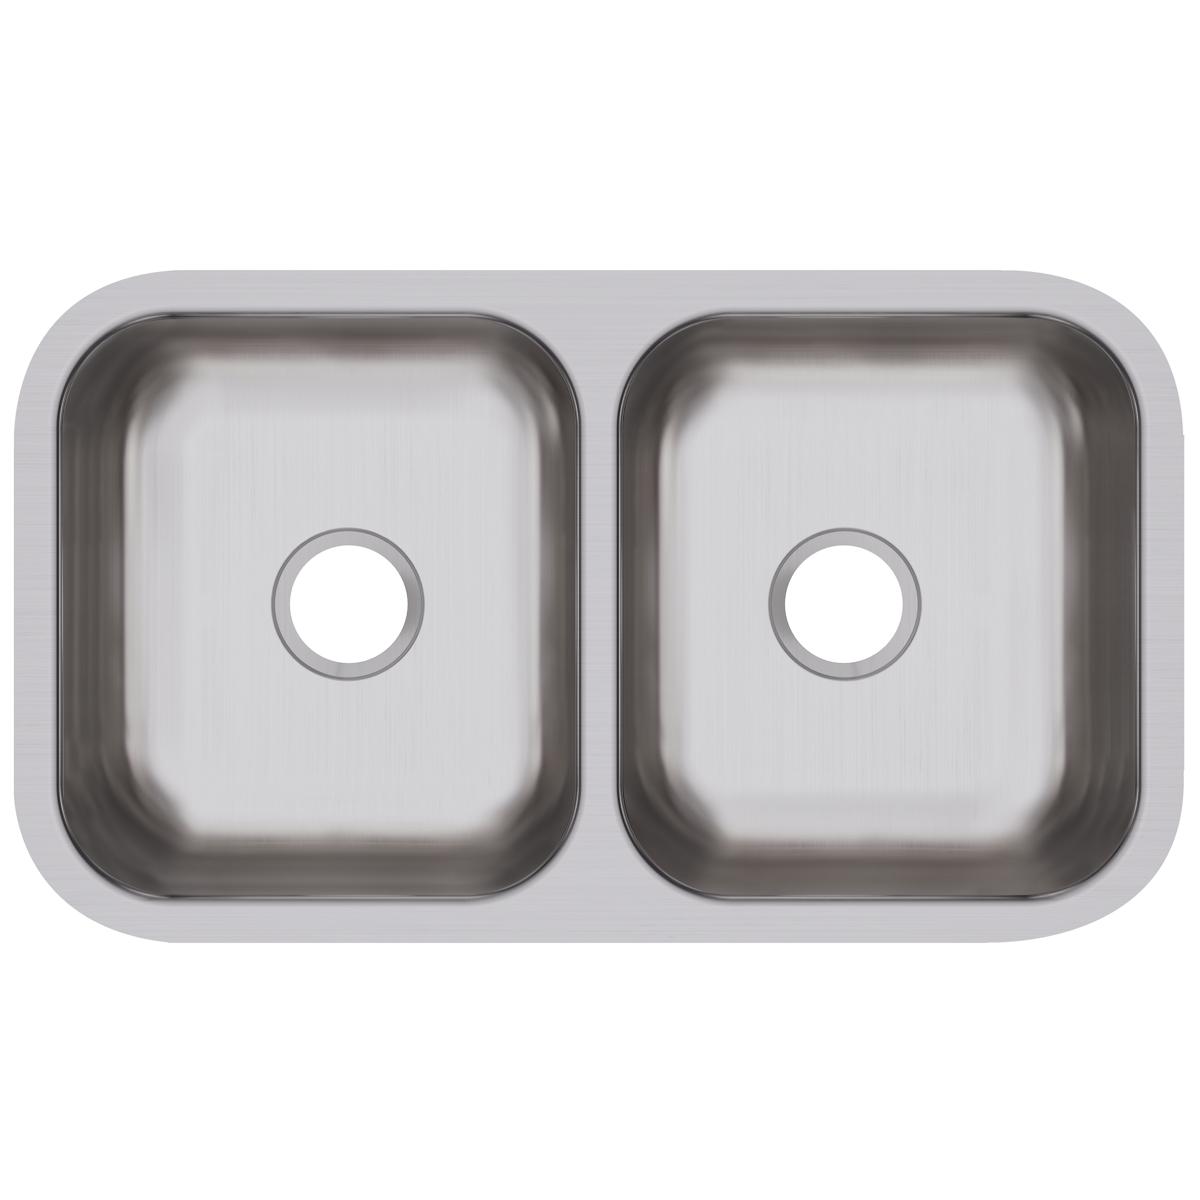 Elkay Dayton Stainless Steel 31-3/4" x 18-1/4" x 8" Equal Double Bowl Undermount Sink